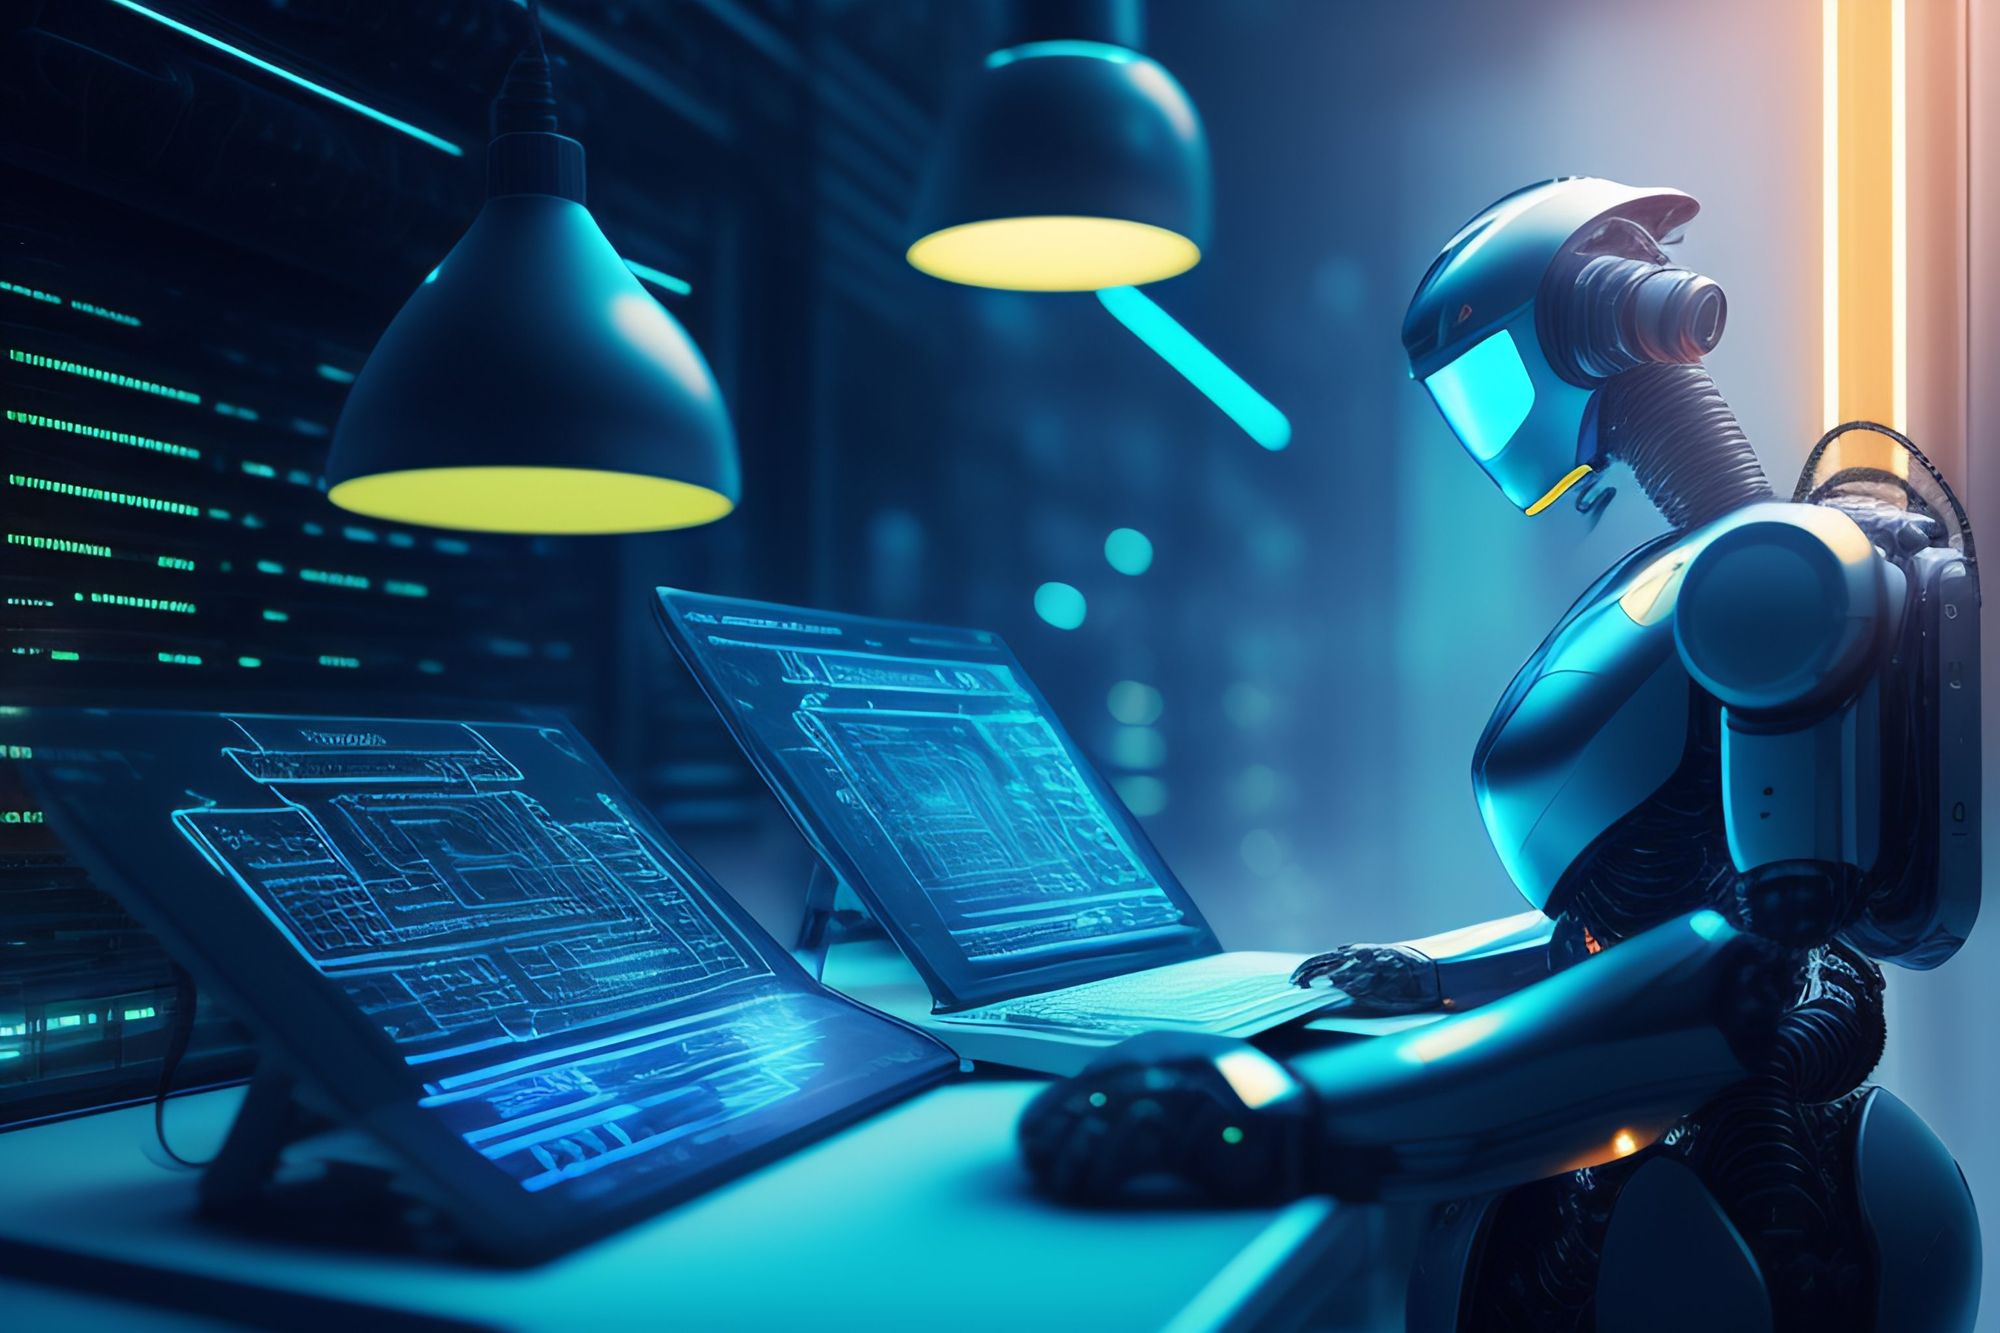 A robot works at a computer station in mysterious blue light